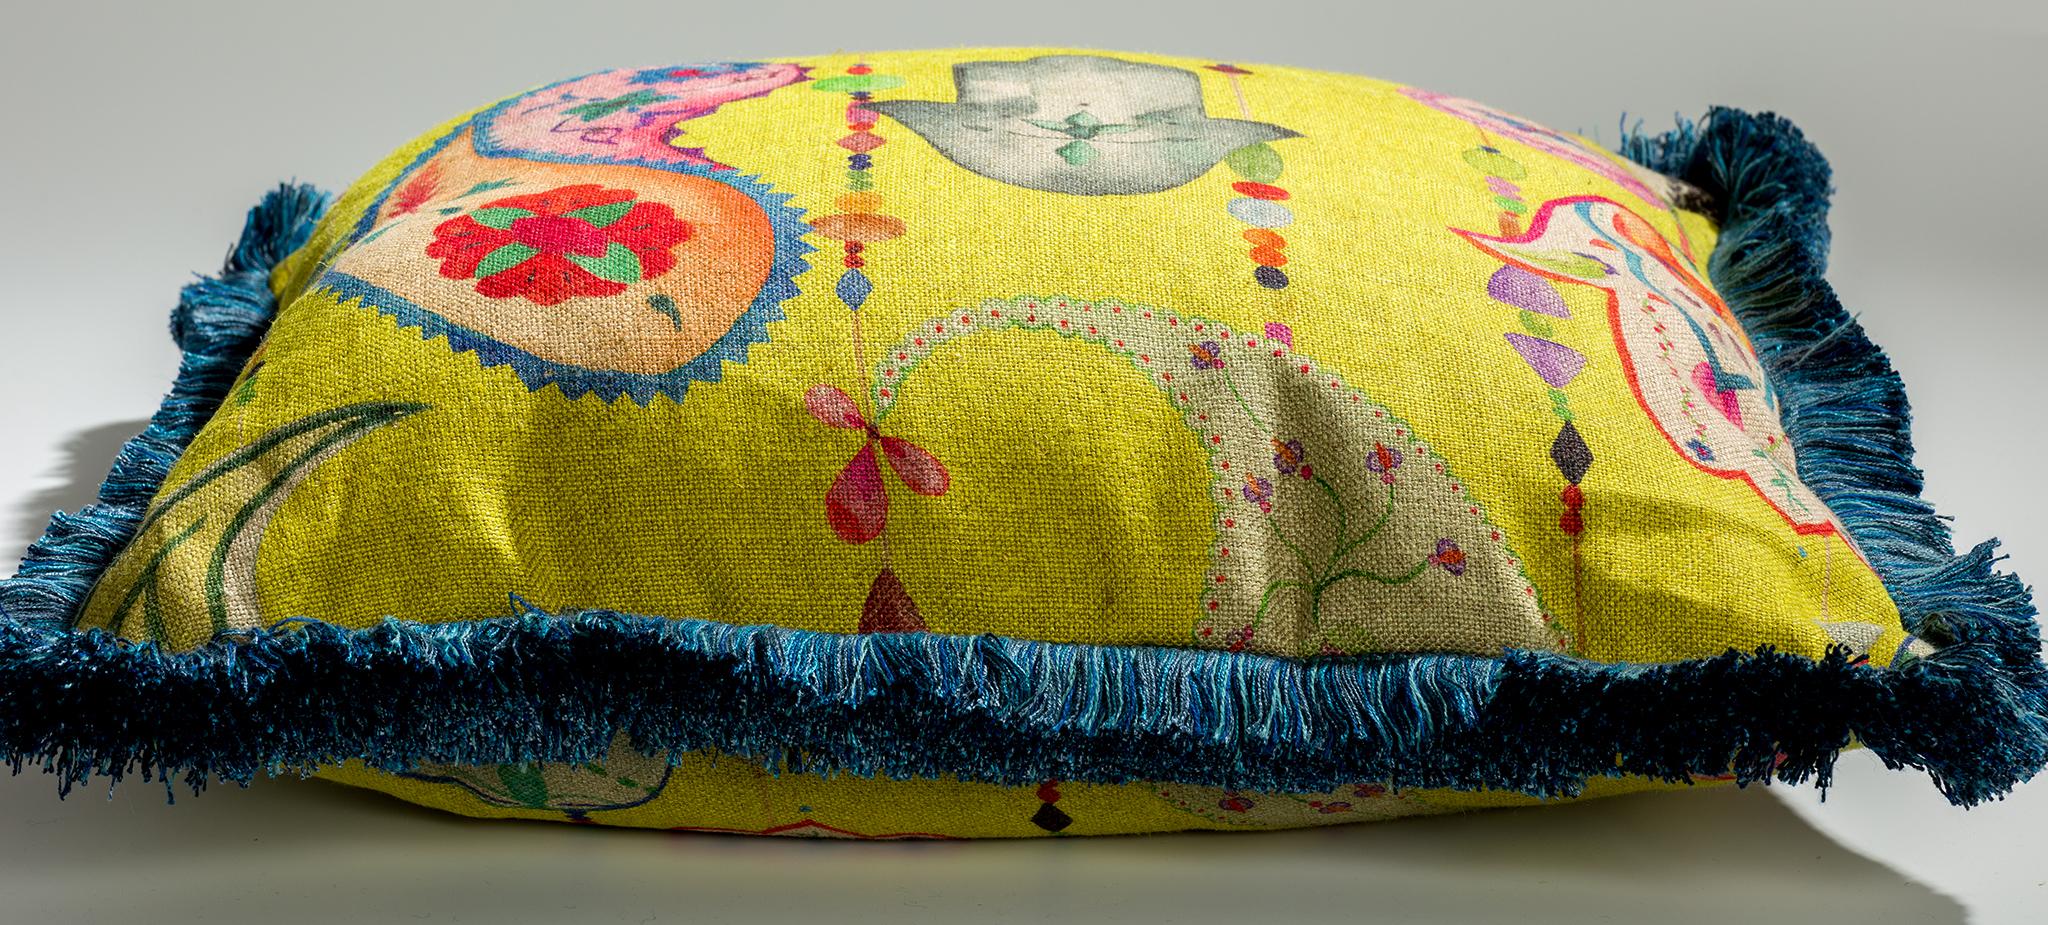 Boho chic multicolored yellow natural linen pillow/cushion: Printed on natural linen and inspired by the coastal town of Tarifa, this positive vibe design works perfectly in both relaxed living spaces as well as working marvelously in your living